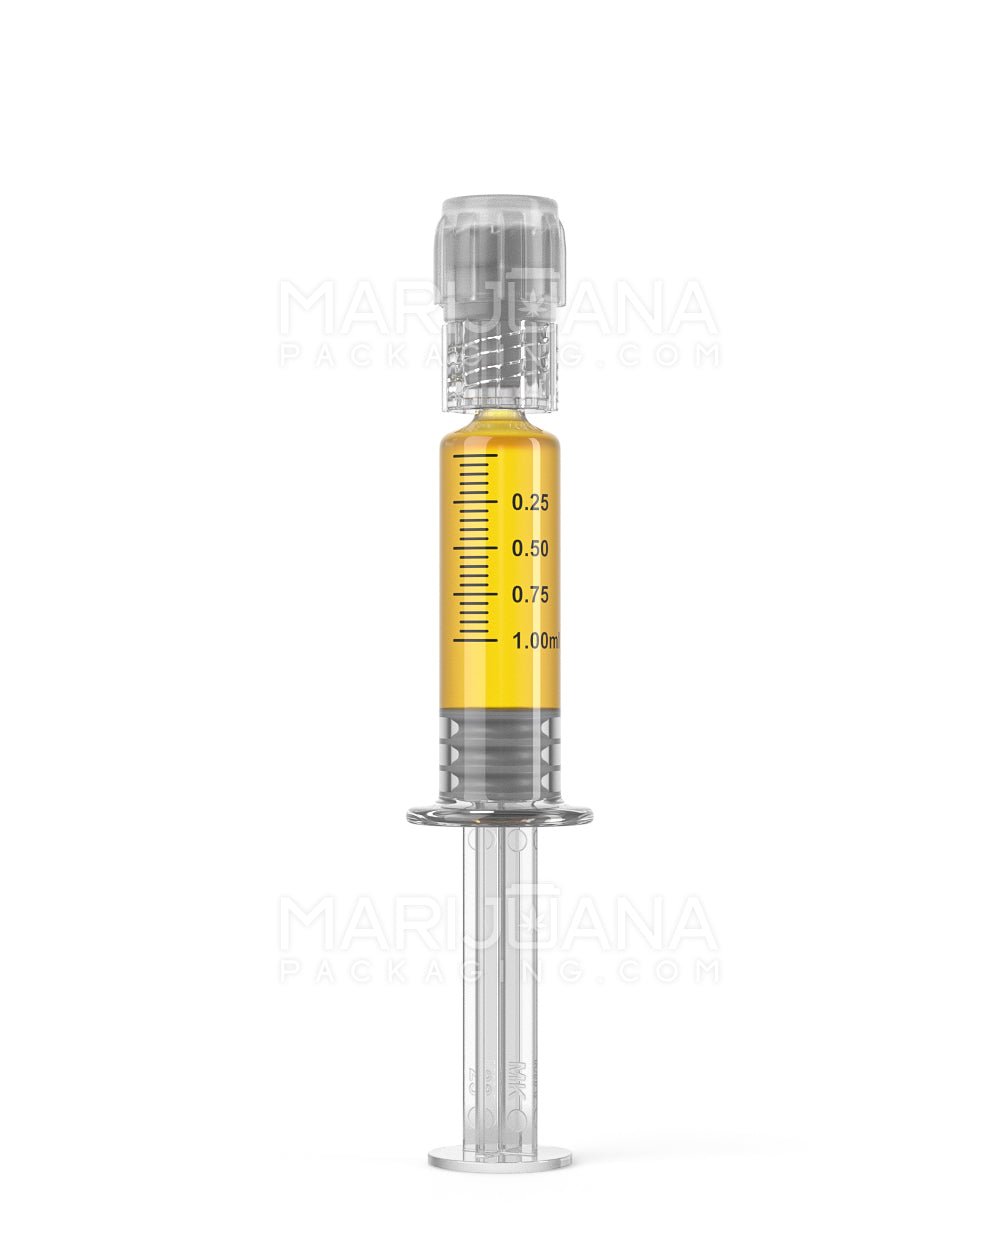 Child Resistant & Luer Lock | Glass Dab Applicator Syringes | 1mL - 0.25mL Increments - 100 Count - 2